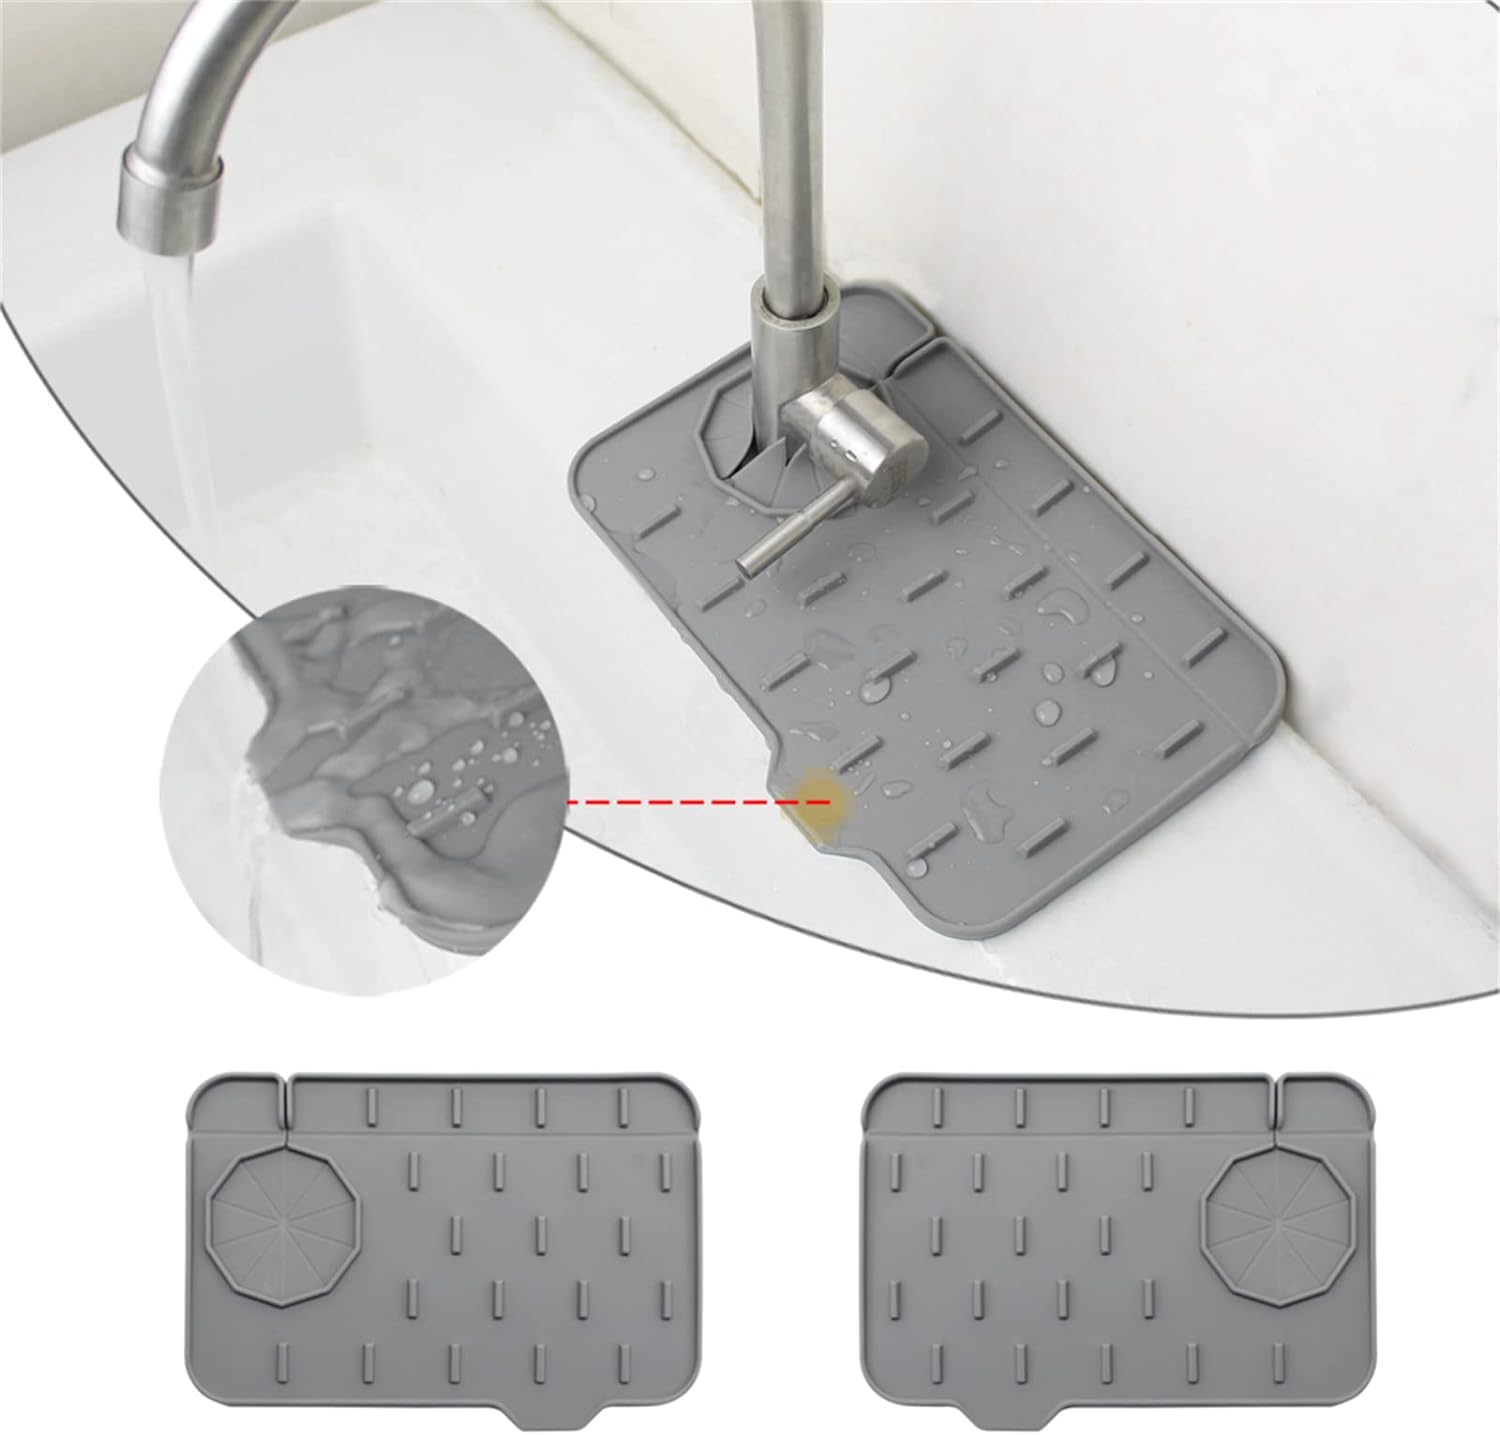 BYTELIVE 2-Pack Bytelive Silicone Sink Mat, Mini Sink Splash Guard and Soap Sponge Holder for Kitchen Countertop Protect with Self Drain